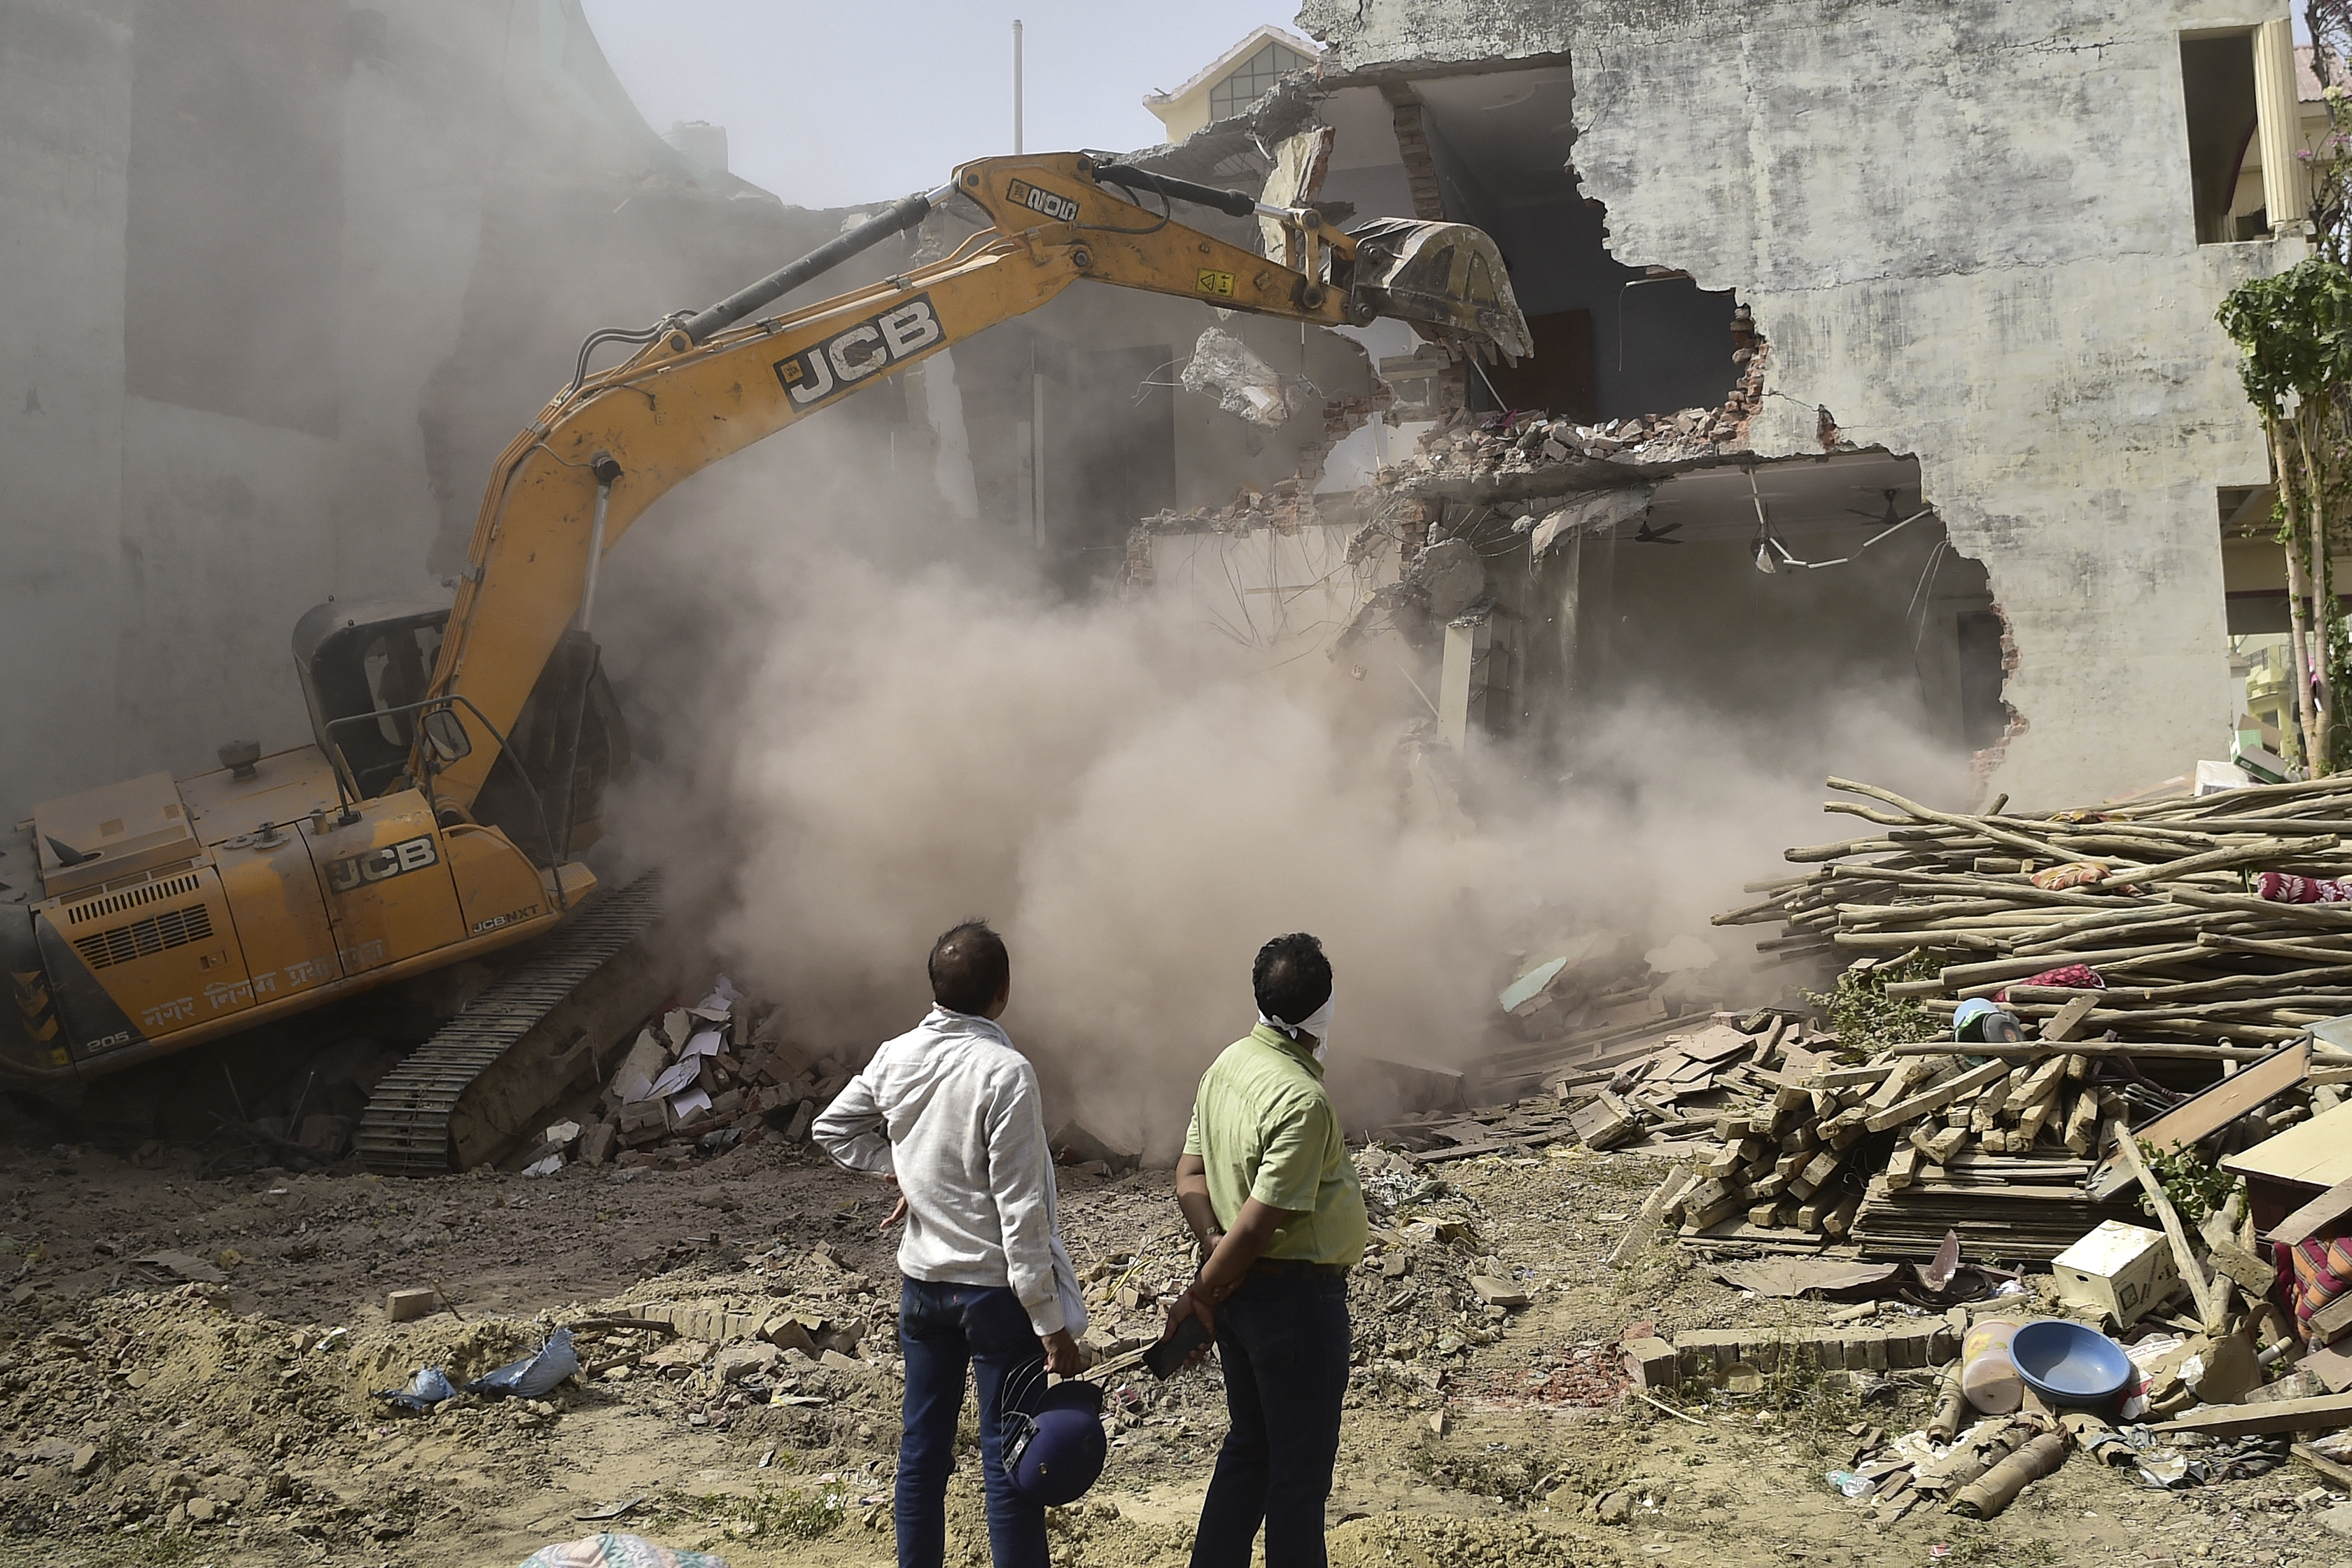 Why Did the Indian Government Demolish This Prominent Activist's House?